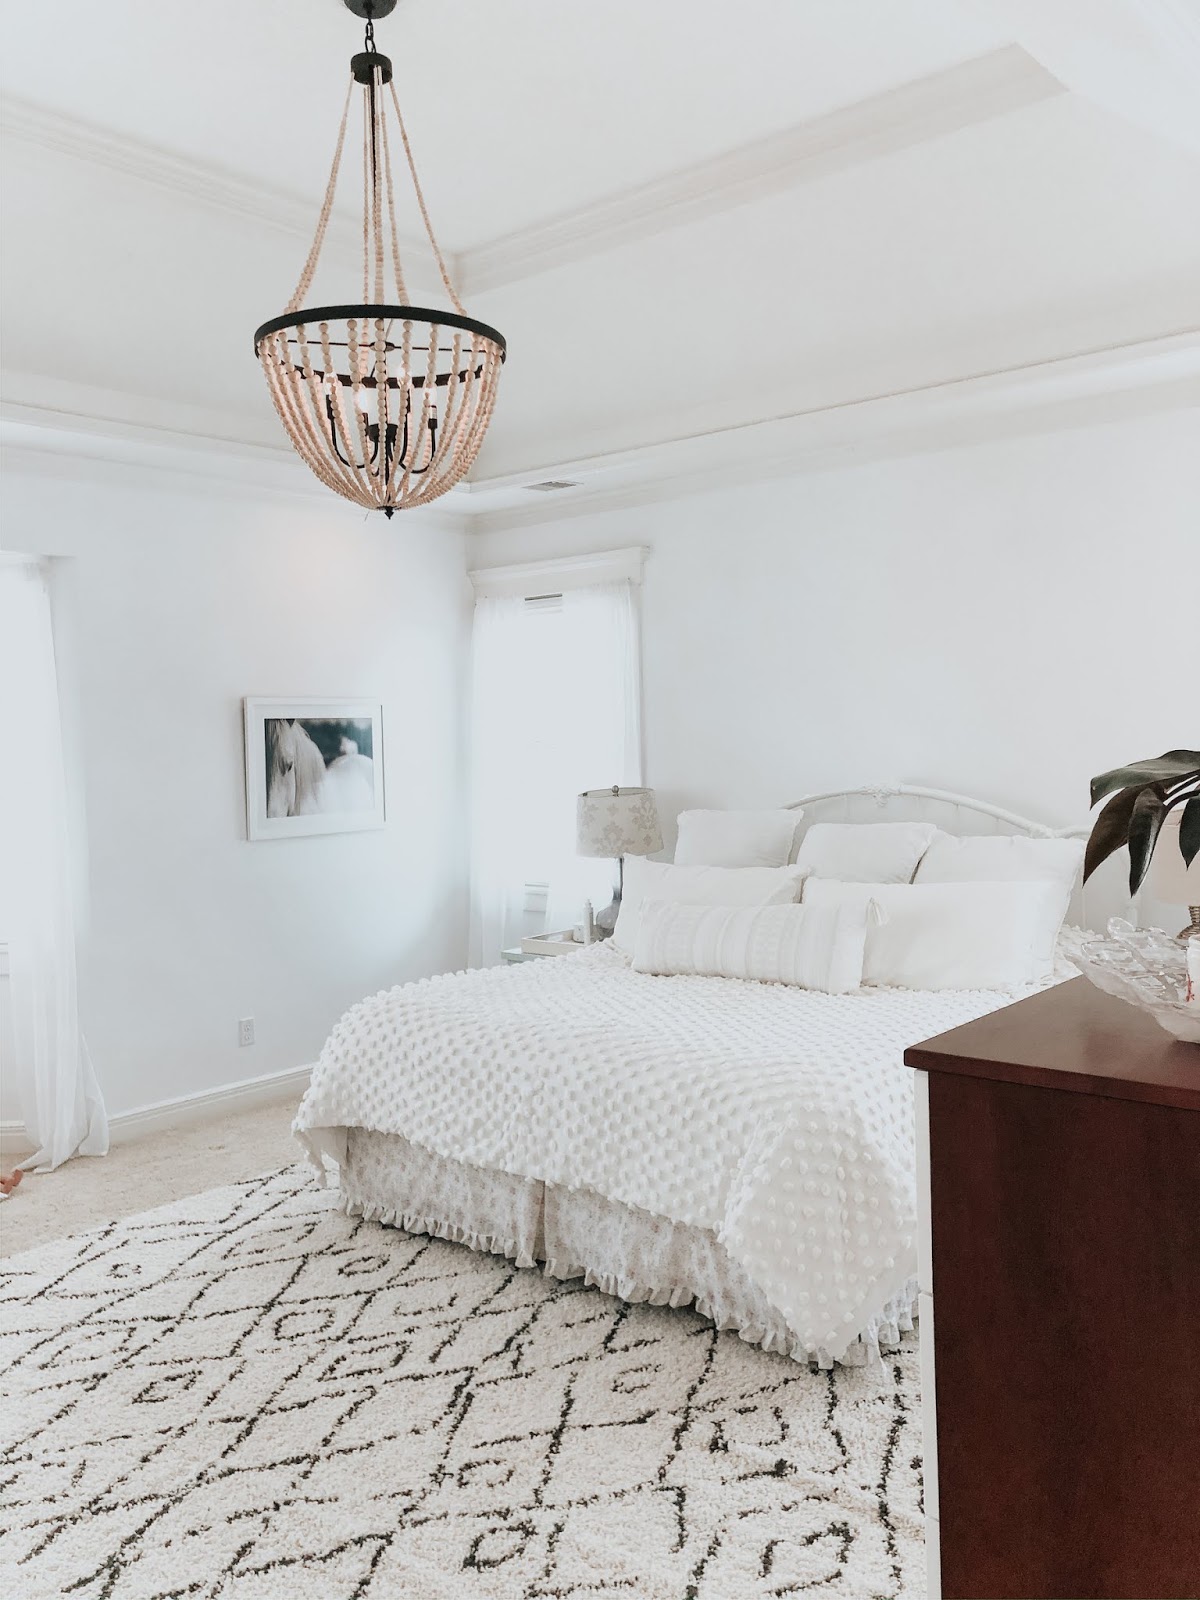 Wendy Correen Smith: Master Bedroom: Chantilly Lace Paint + Beaded  Chandelier + Organic Linen Bedding